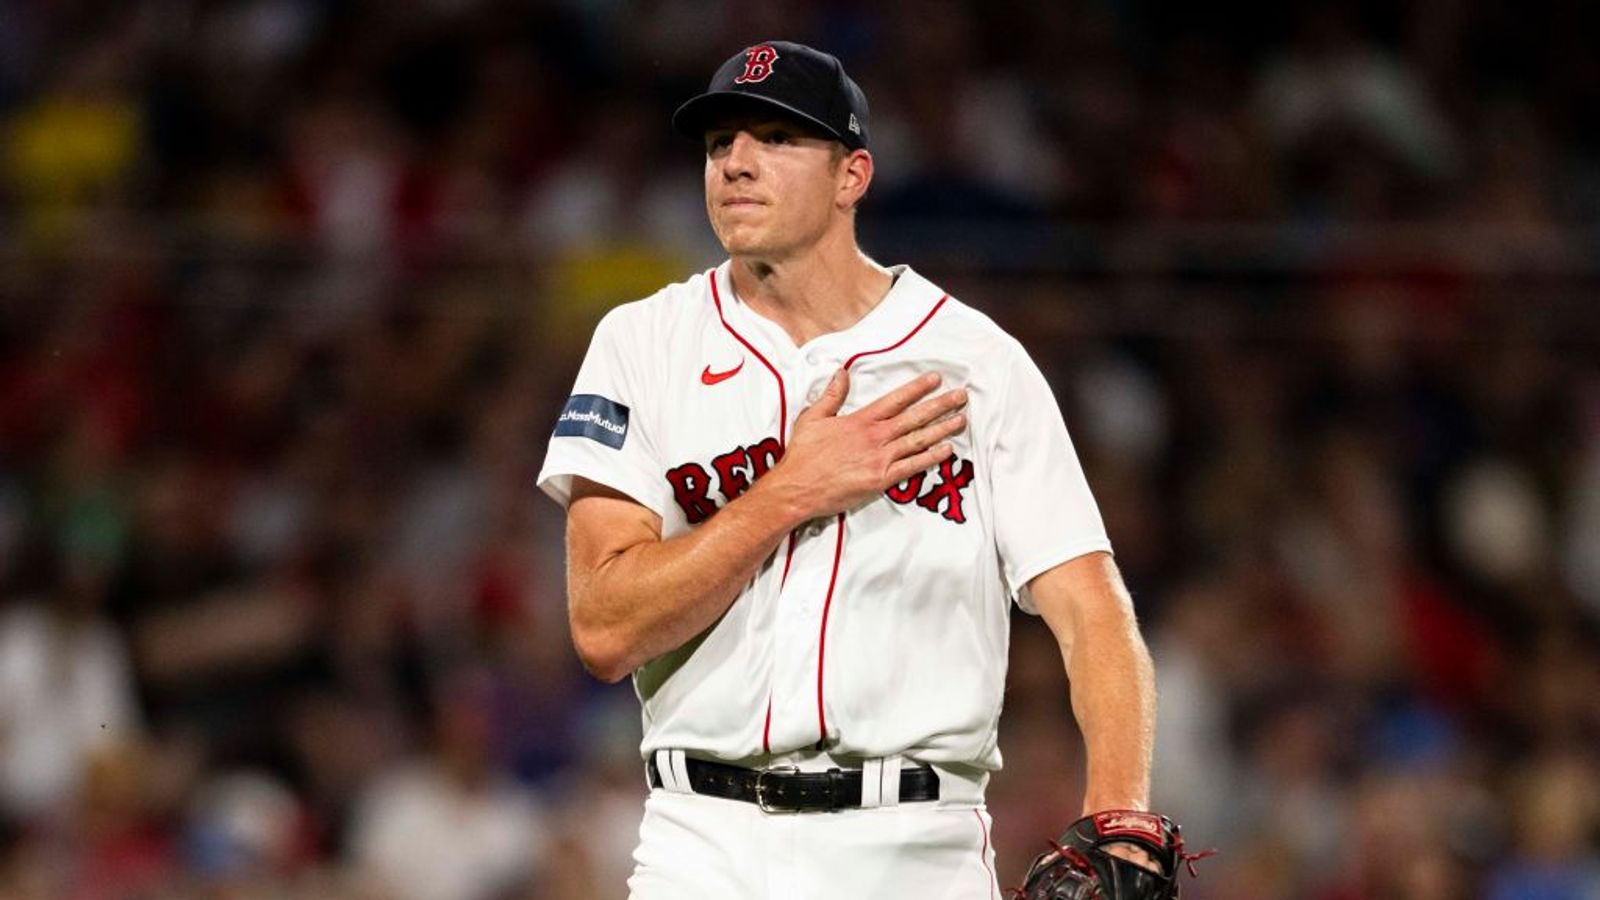 Despite his recent success, Nick Pivetta to remain in the Red Sox